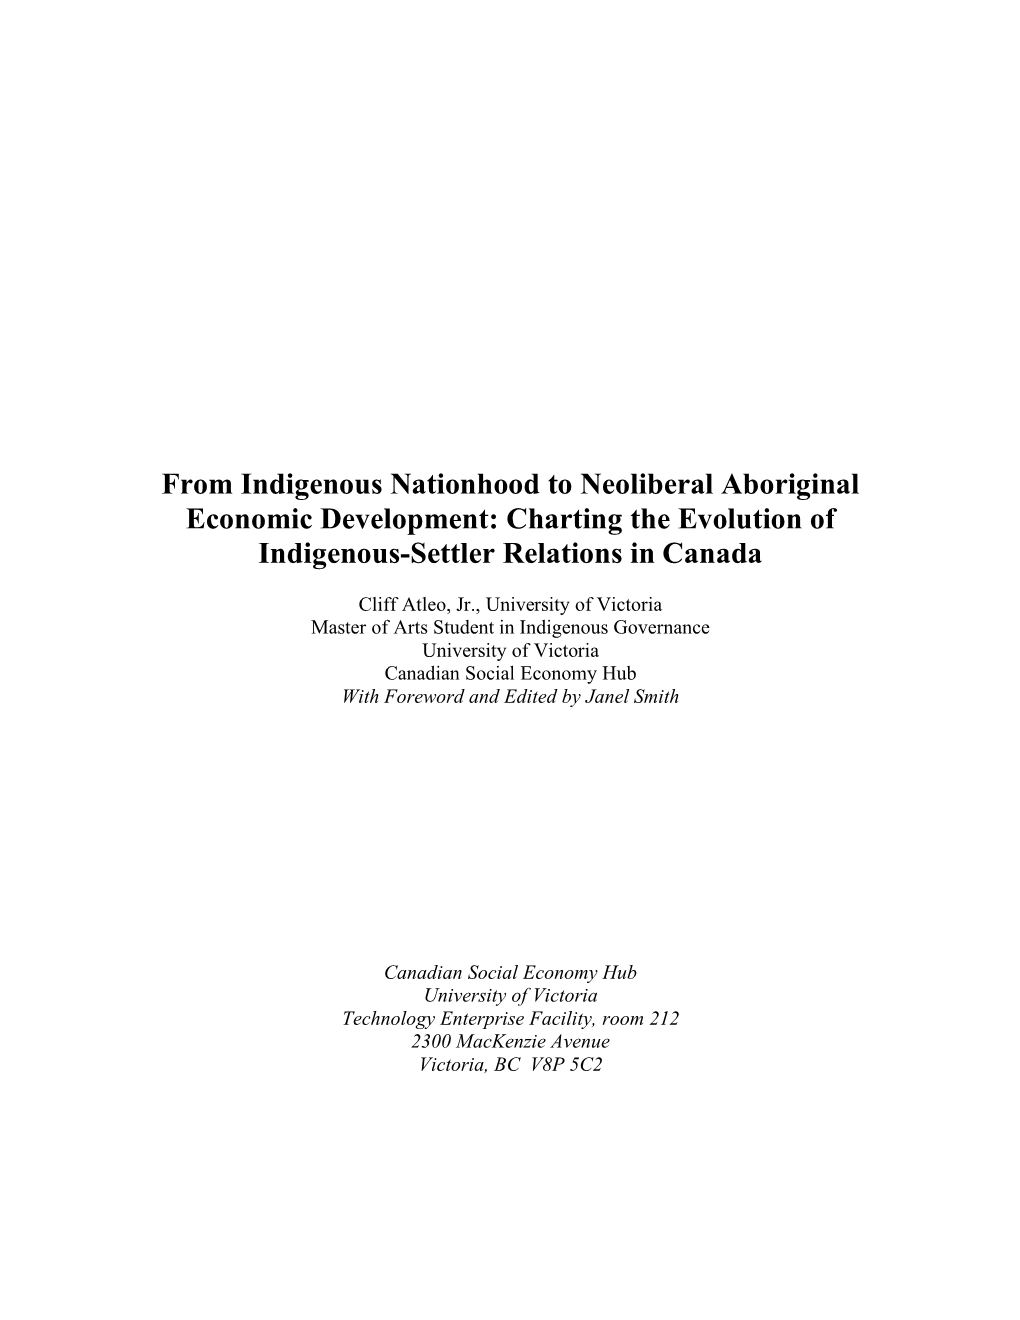 From Indigenous Nationhood to Neoliberal Aboriginal Economic Development: Charting the Evolution of Indigenous-Settler Relations in Canada